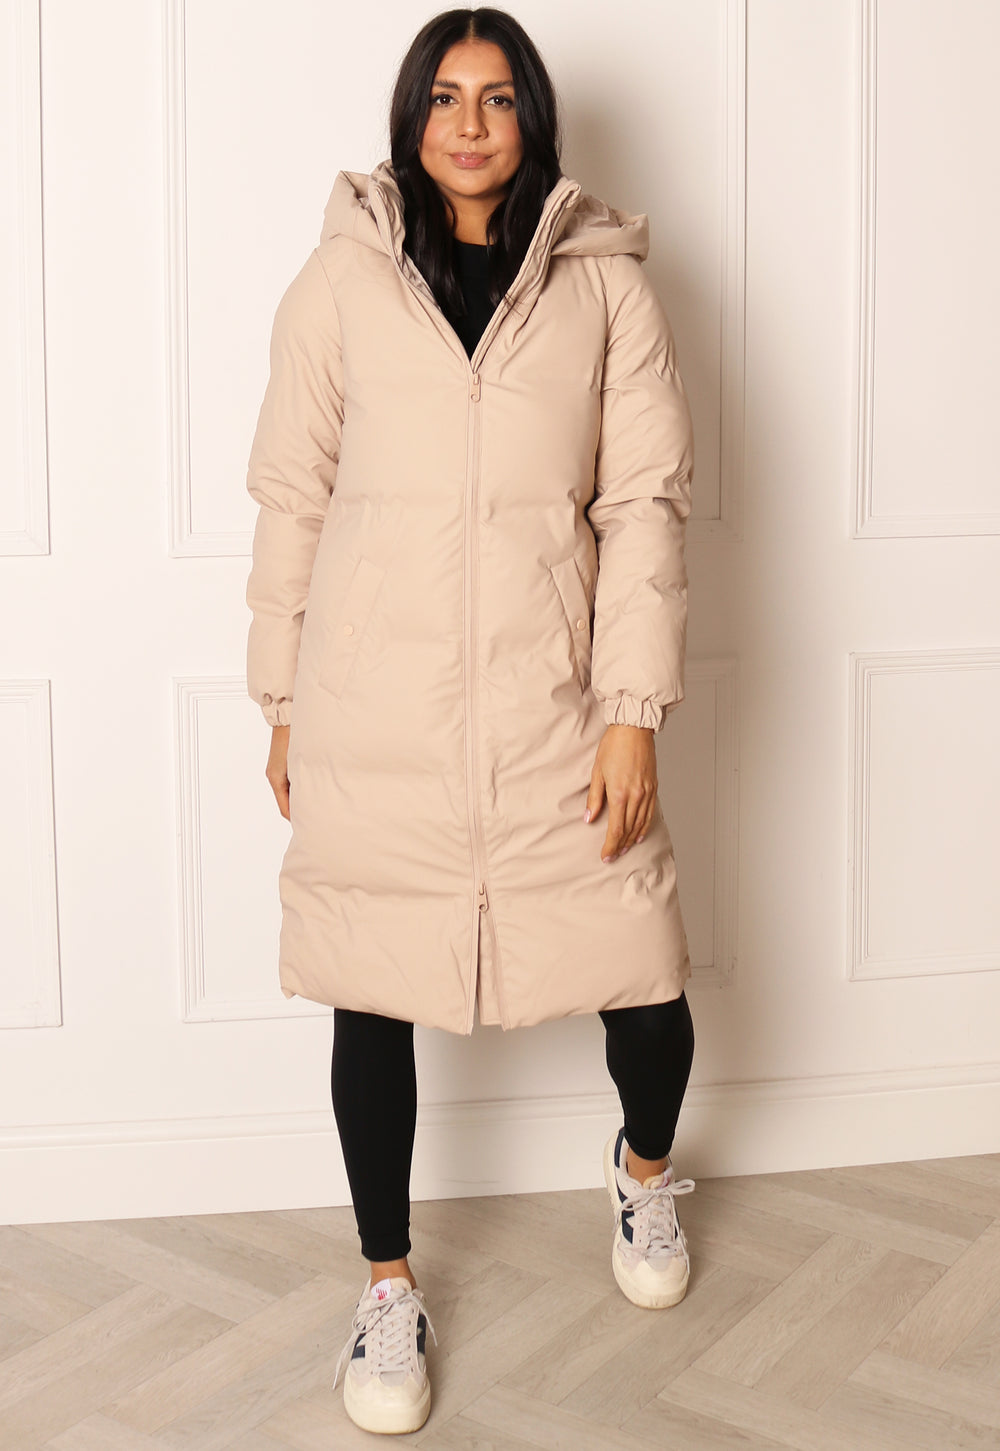 VERO MODA Long Noe Water Repellent Quilted Hooded Midi Puffer Coat in Soft Beige | One Clothing VERO Long Noe Water Repellent Quilted Hooded Puffer in